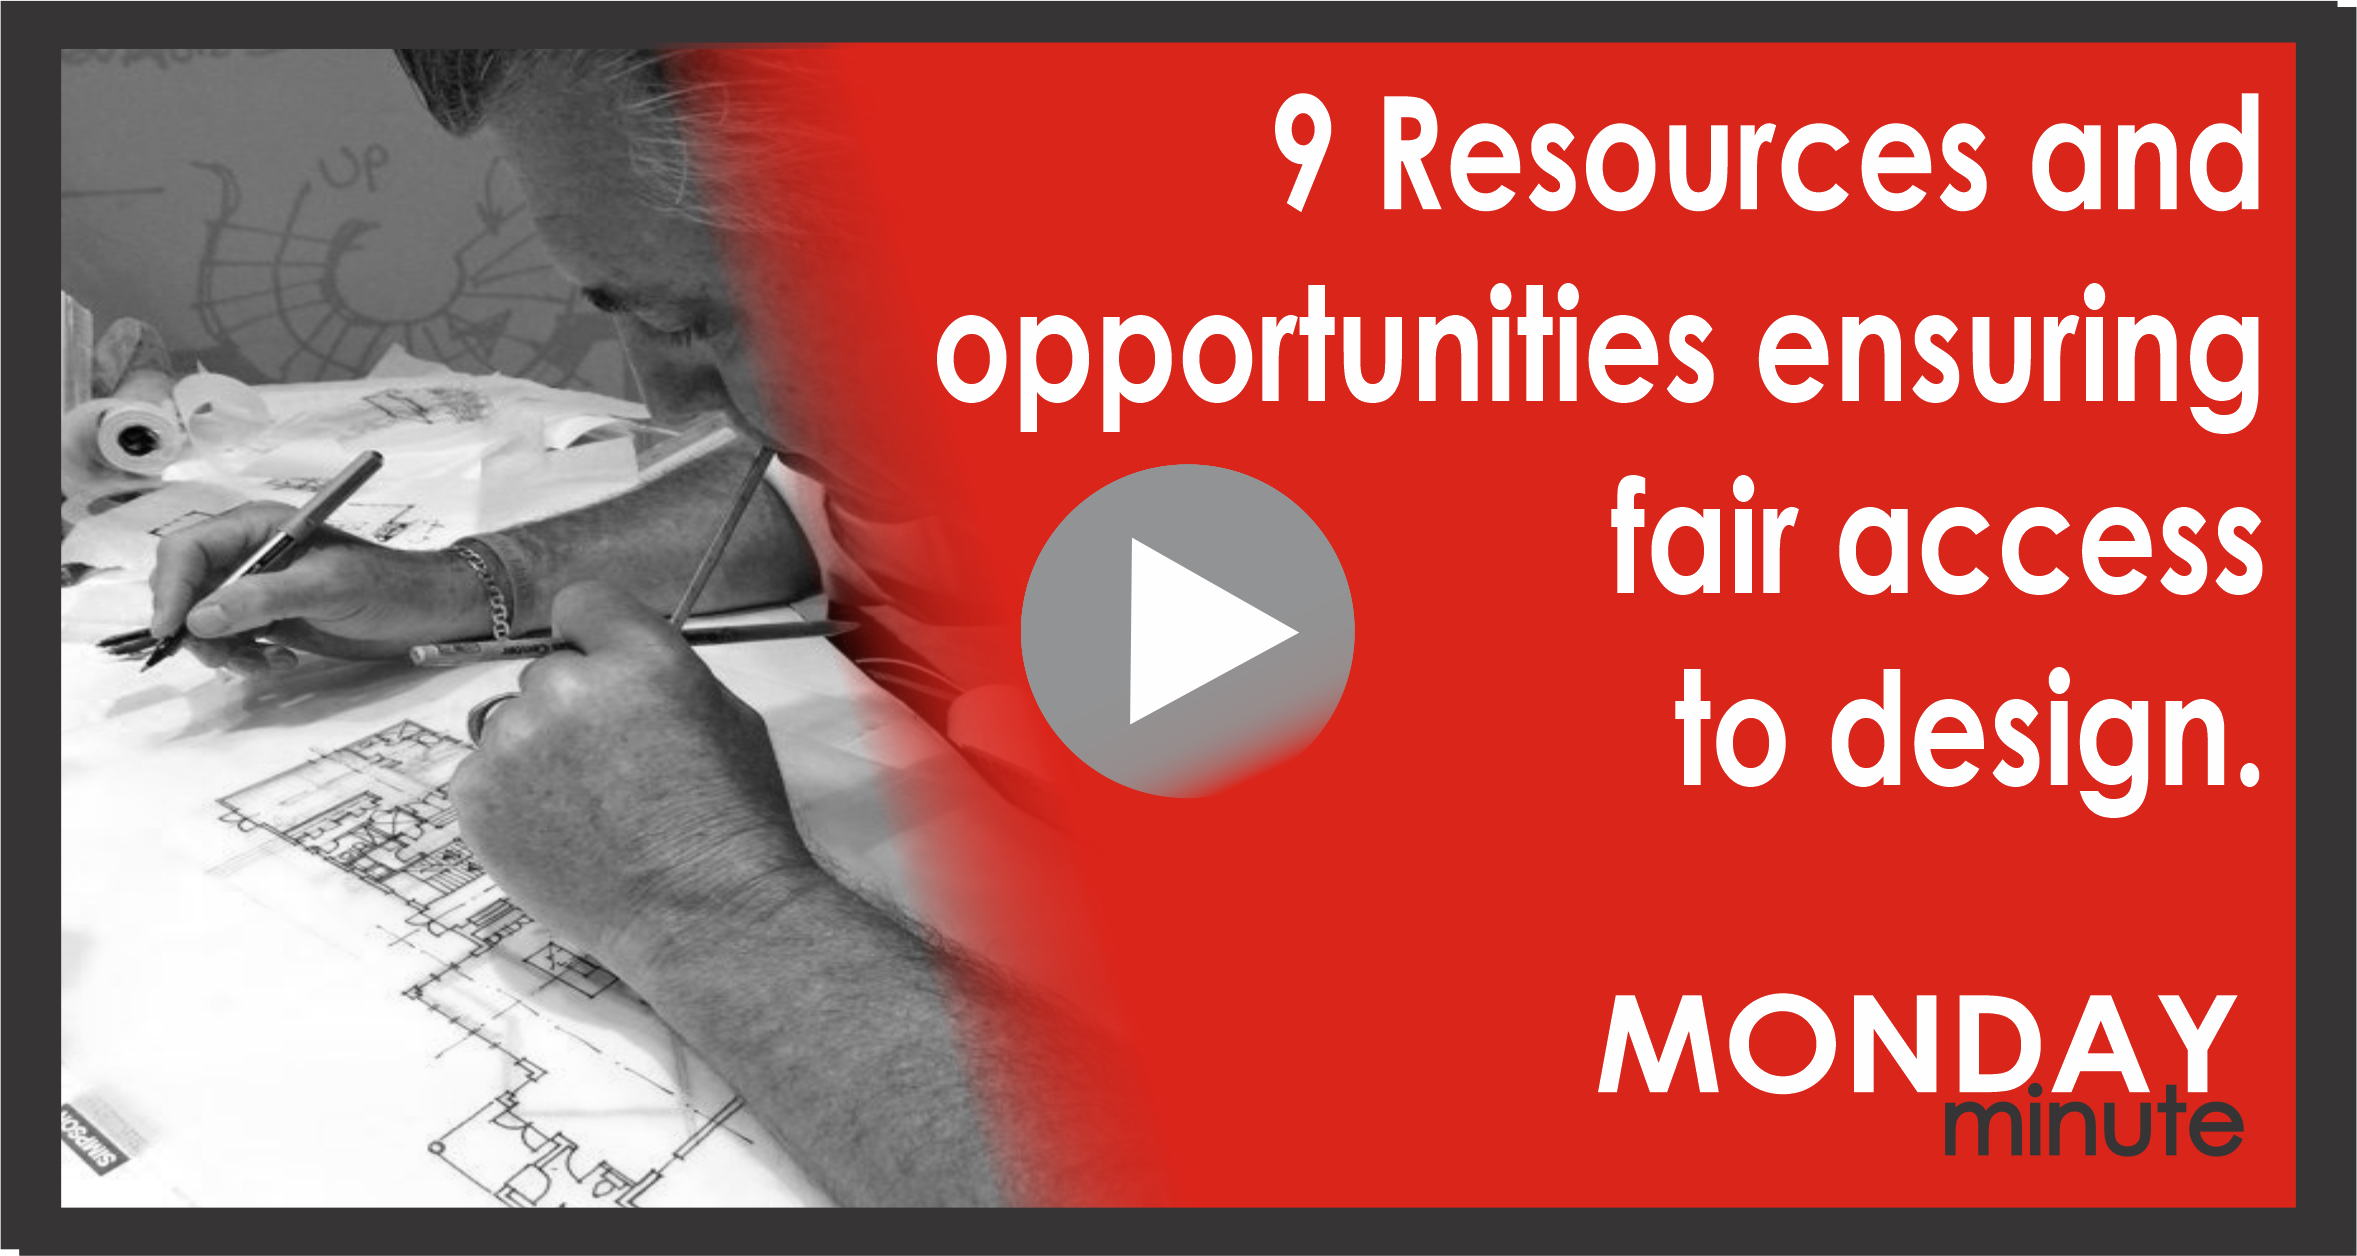 9 Resources and opportunities ensuring fair access to design.